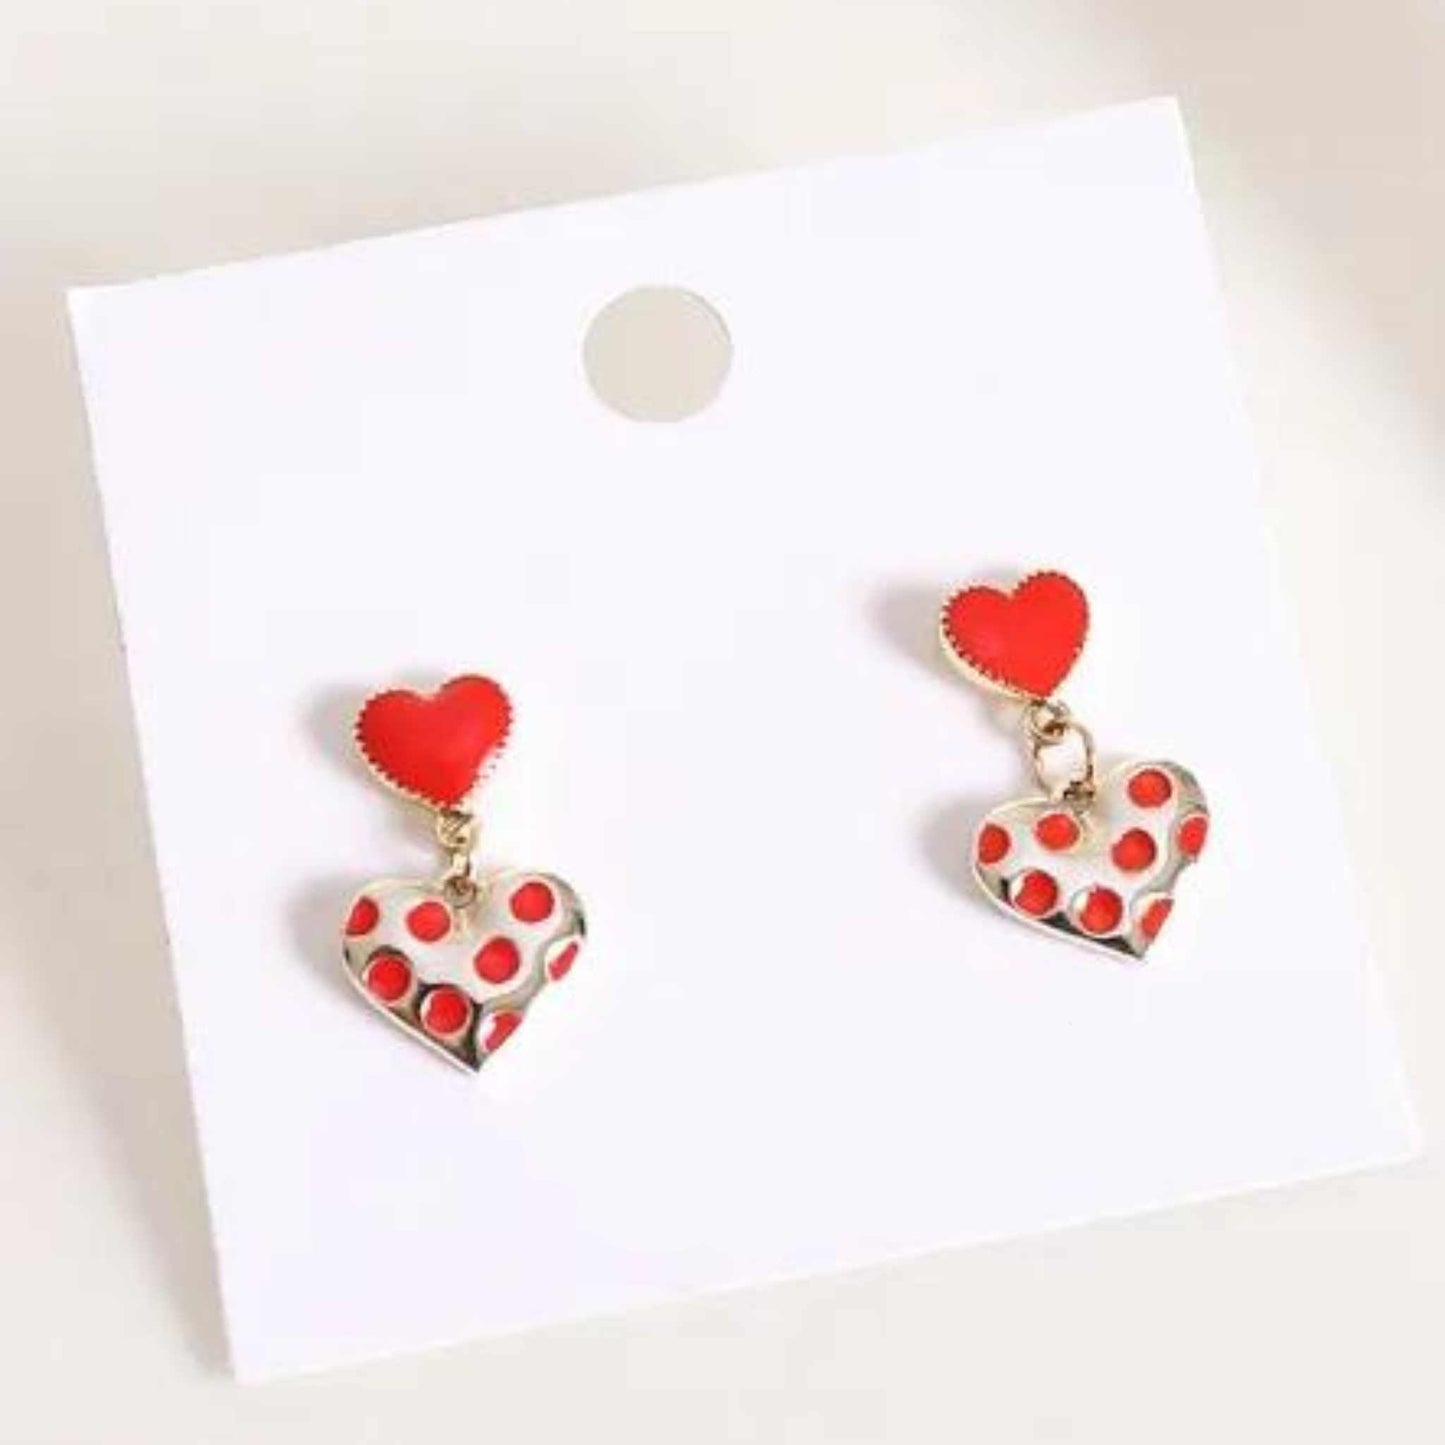 Earrings Heart Dangle Stud Earrings - Red and Gold NI- NHBW1475851-Section-1-red-love-heart